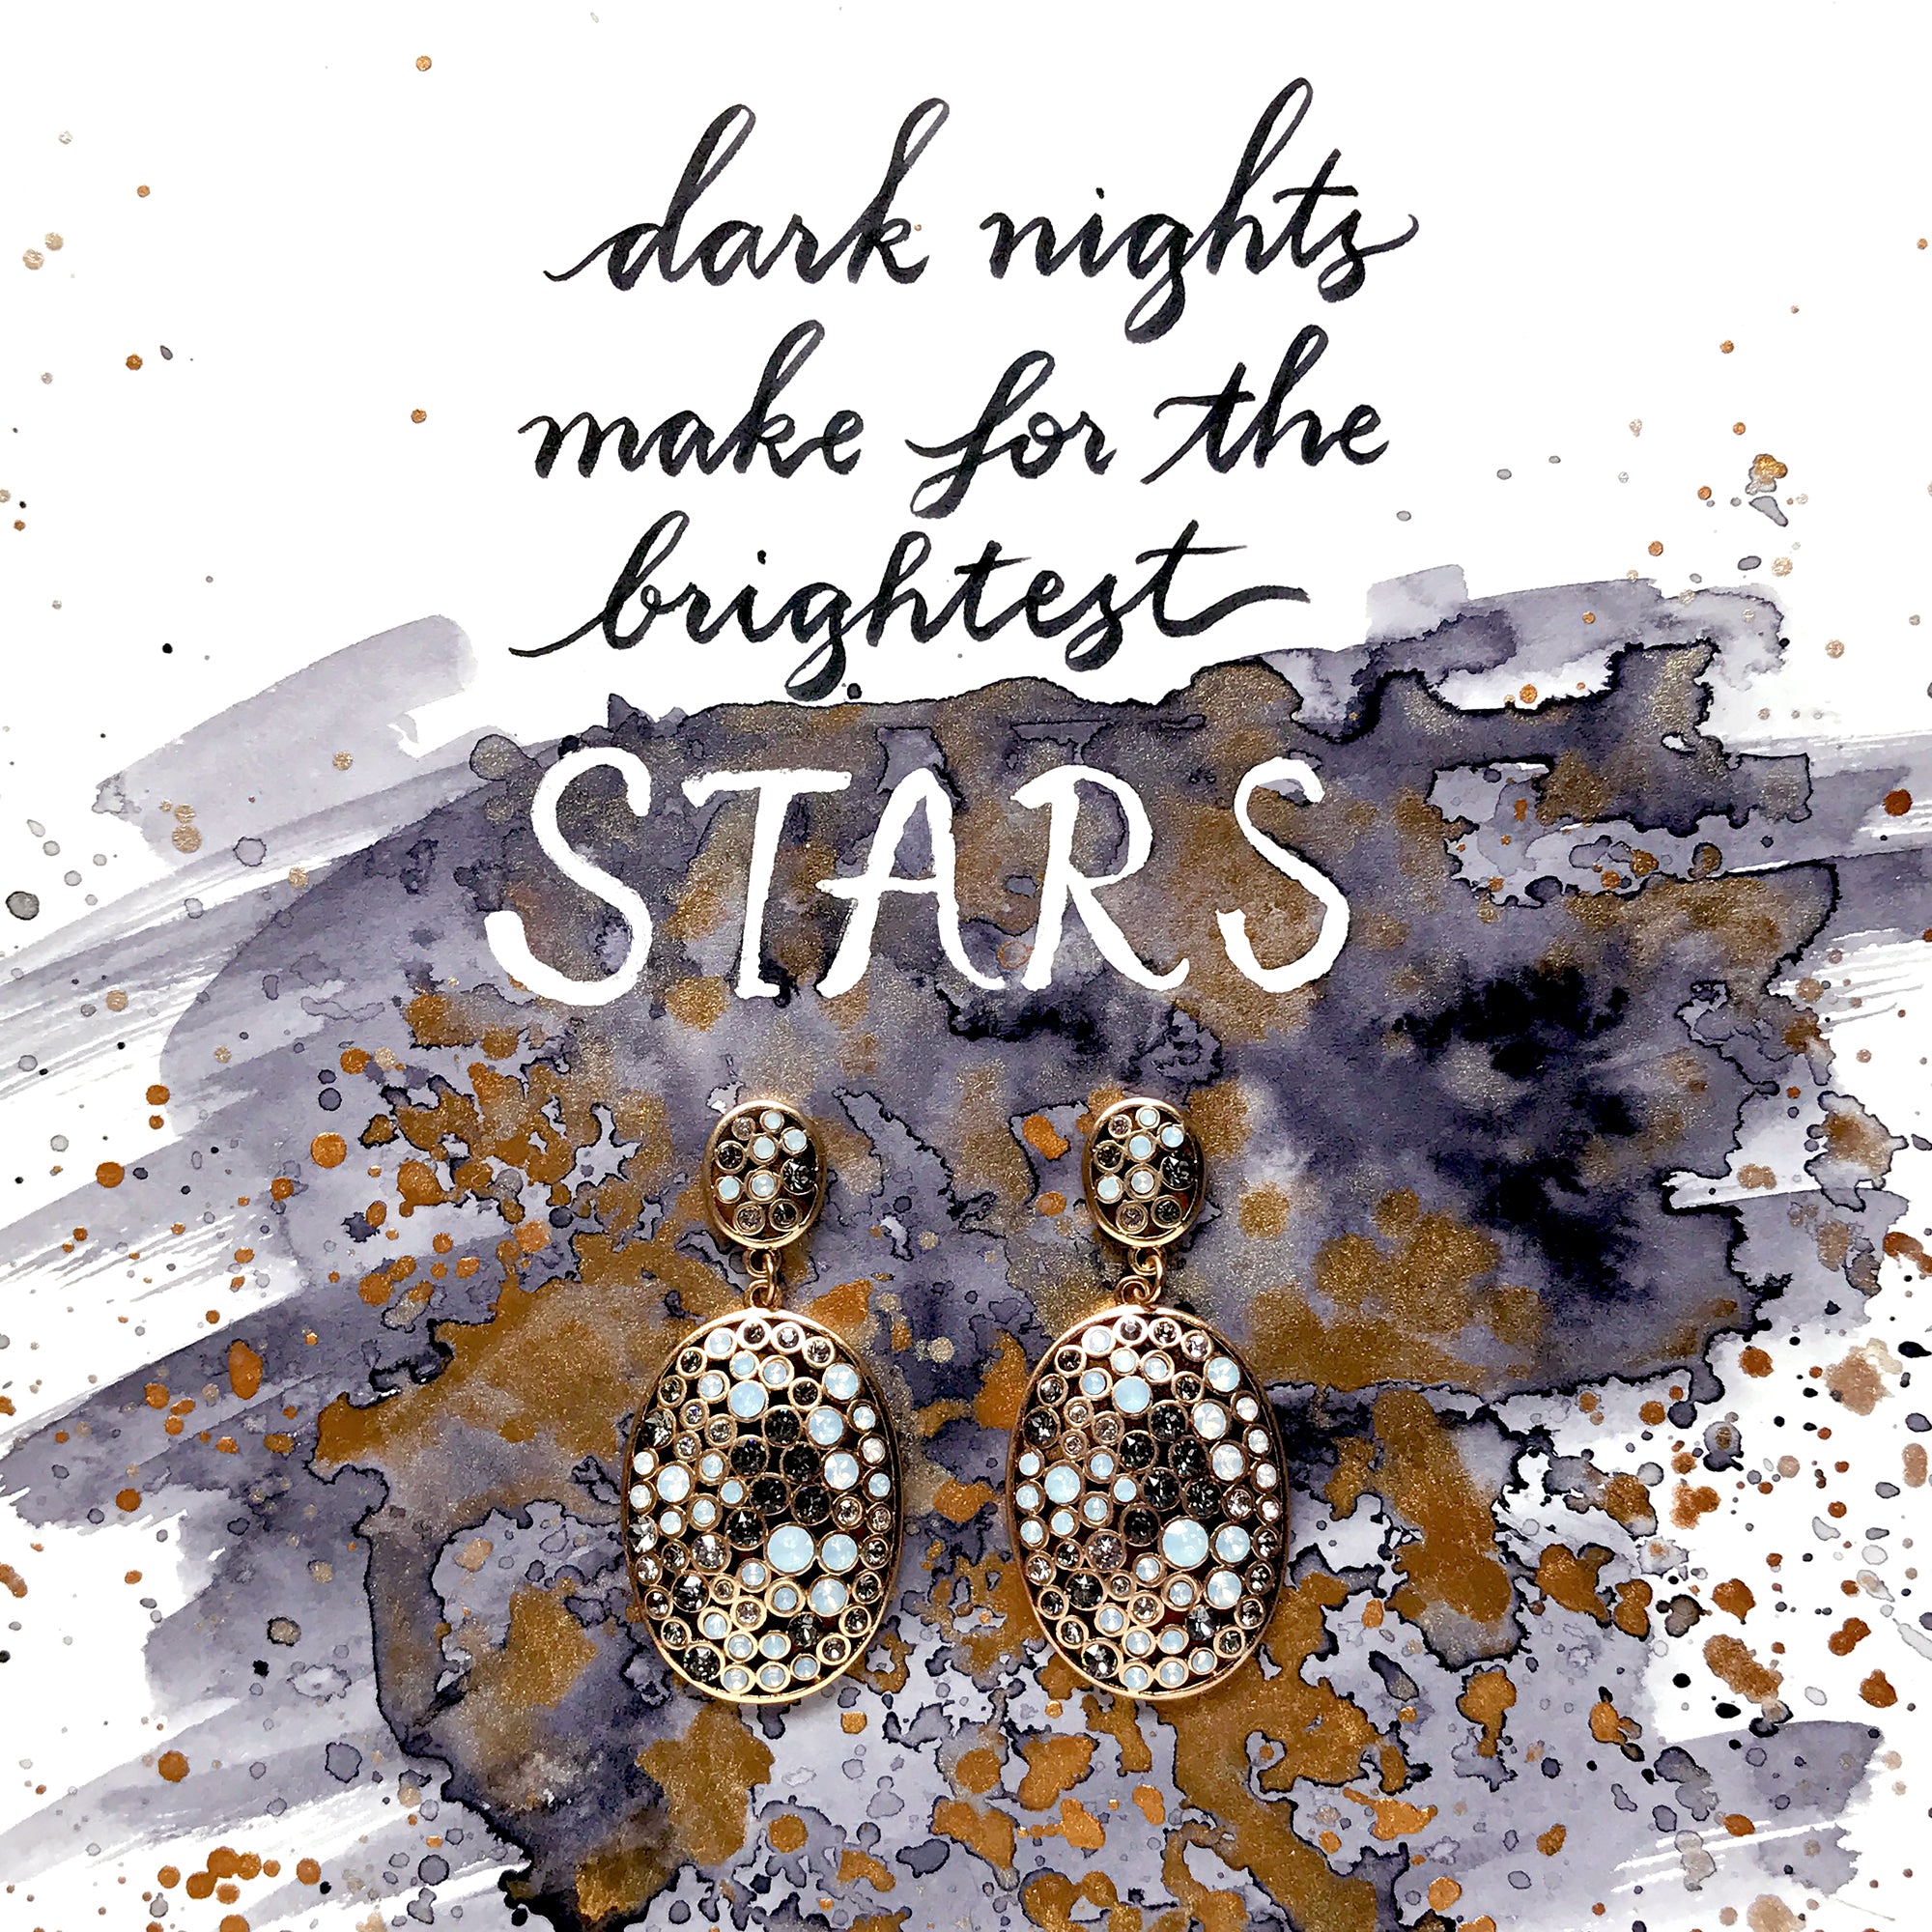 #SequinSayings - The Darker the Night, the Brighter the Stars...